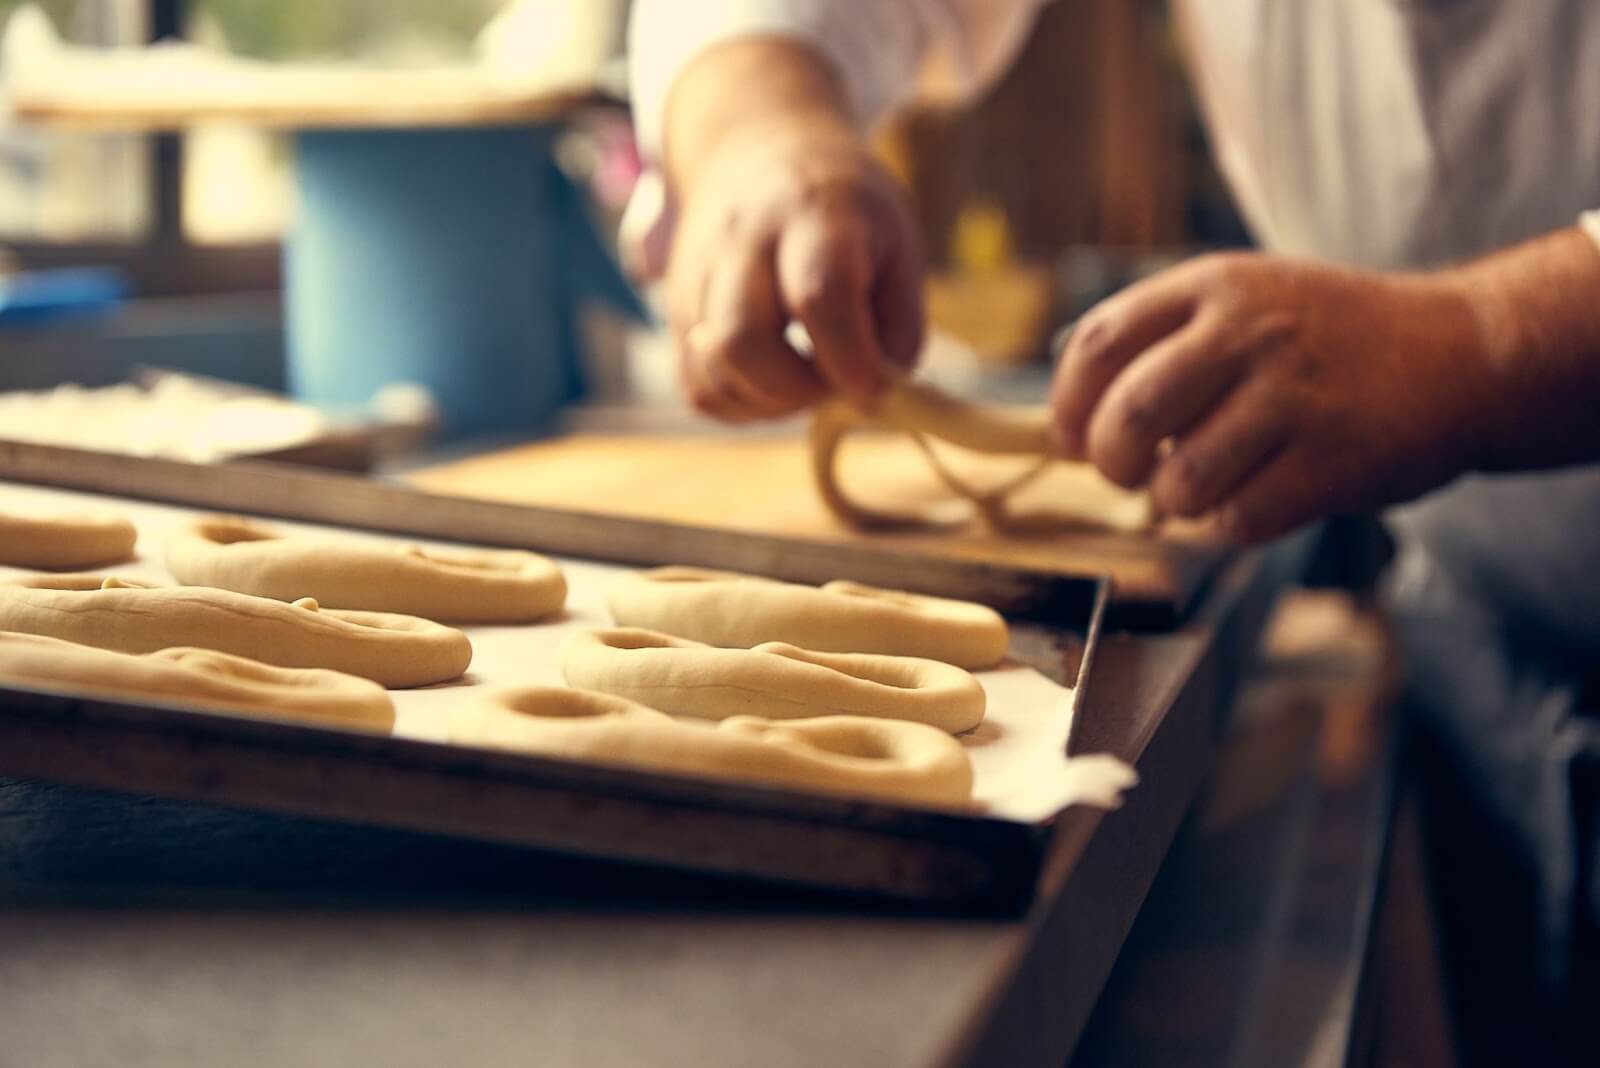 a close up of a person shaping soft pretzels to bake in the oven